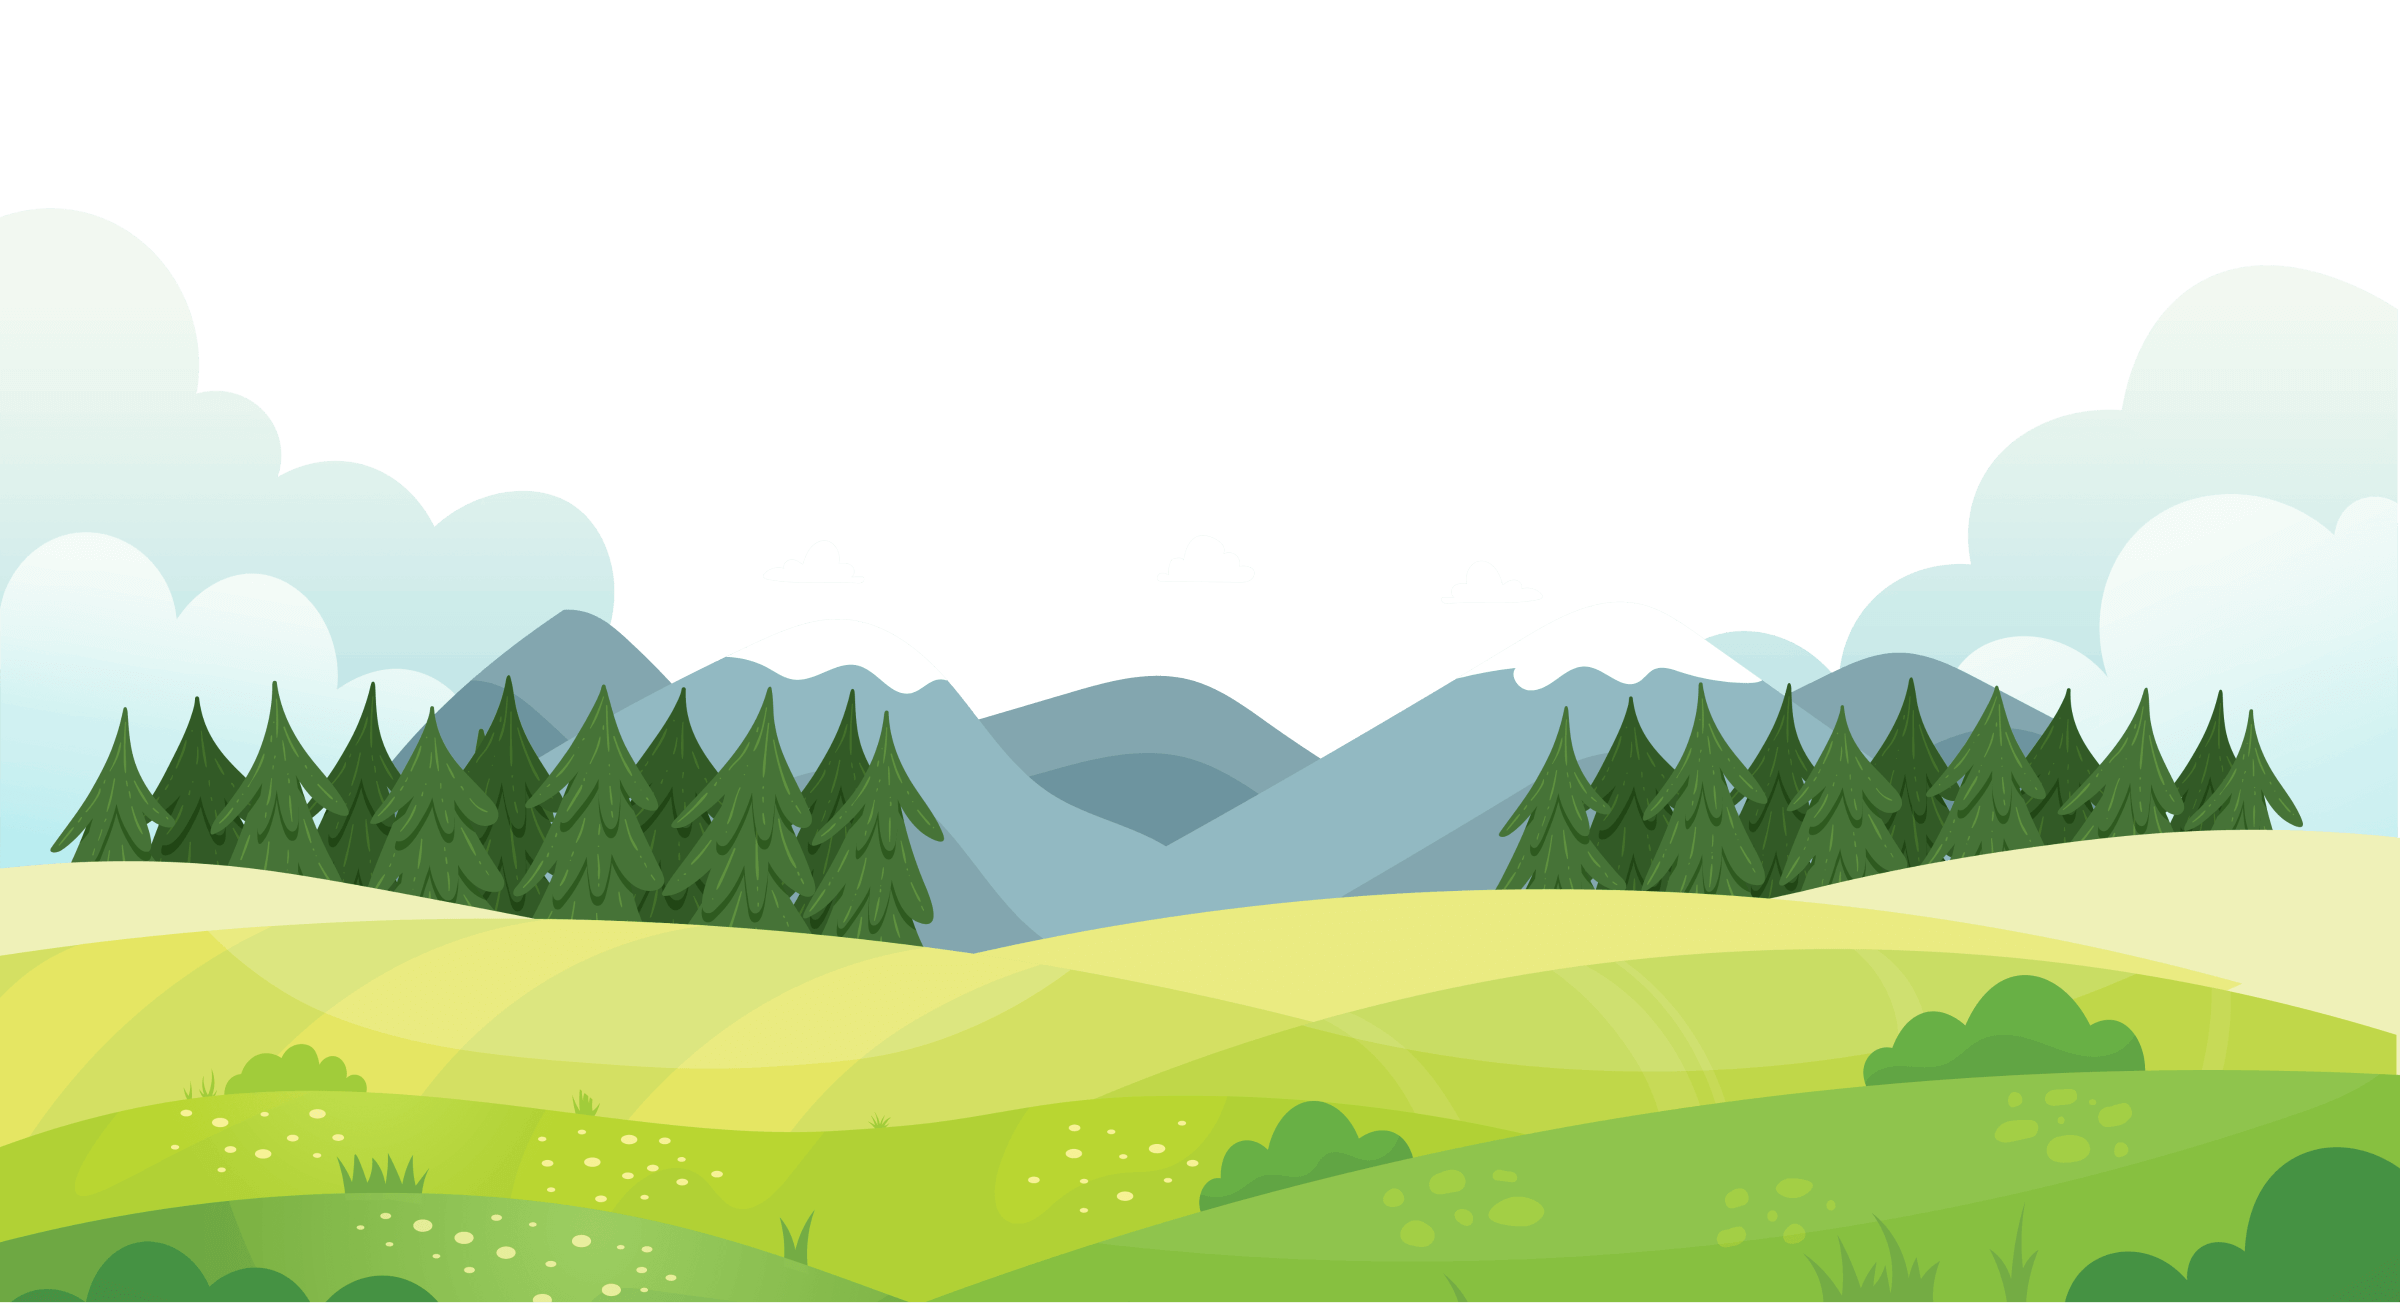 r43-background-forest-optimized-17128279792018.png